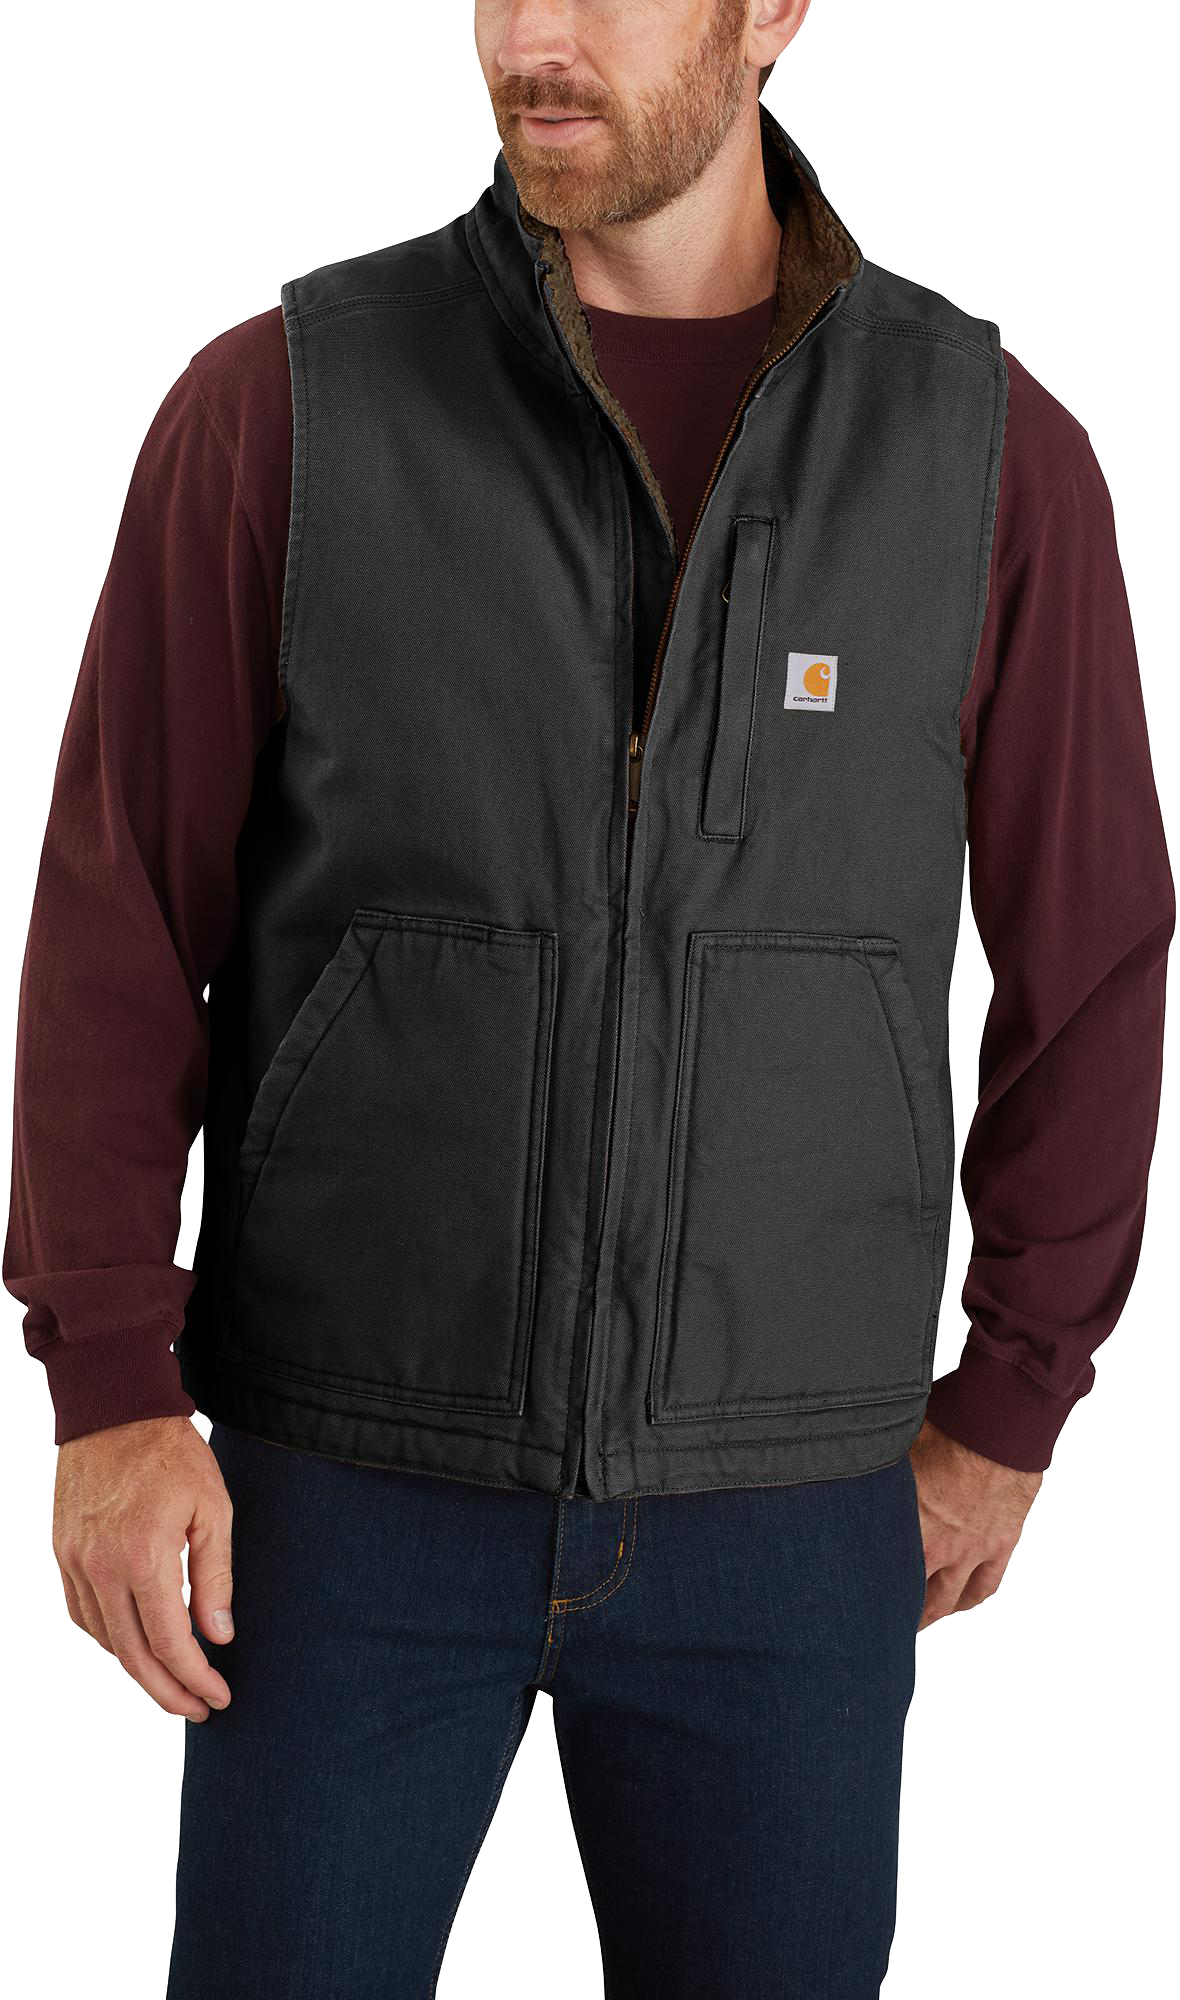 Carhartt Women's - Washed Duck Sherpa Lined Jacket – Go Boot Country